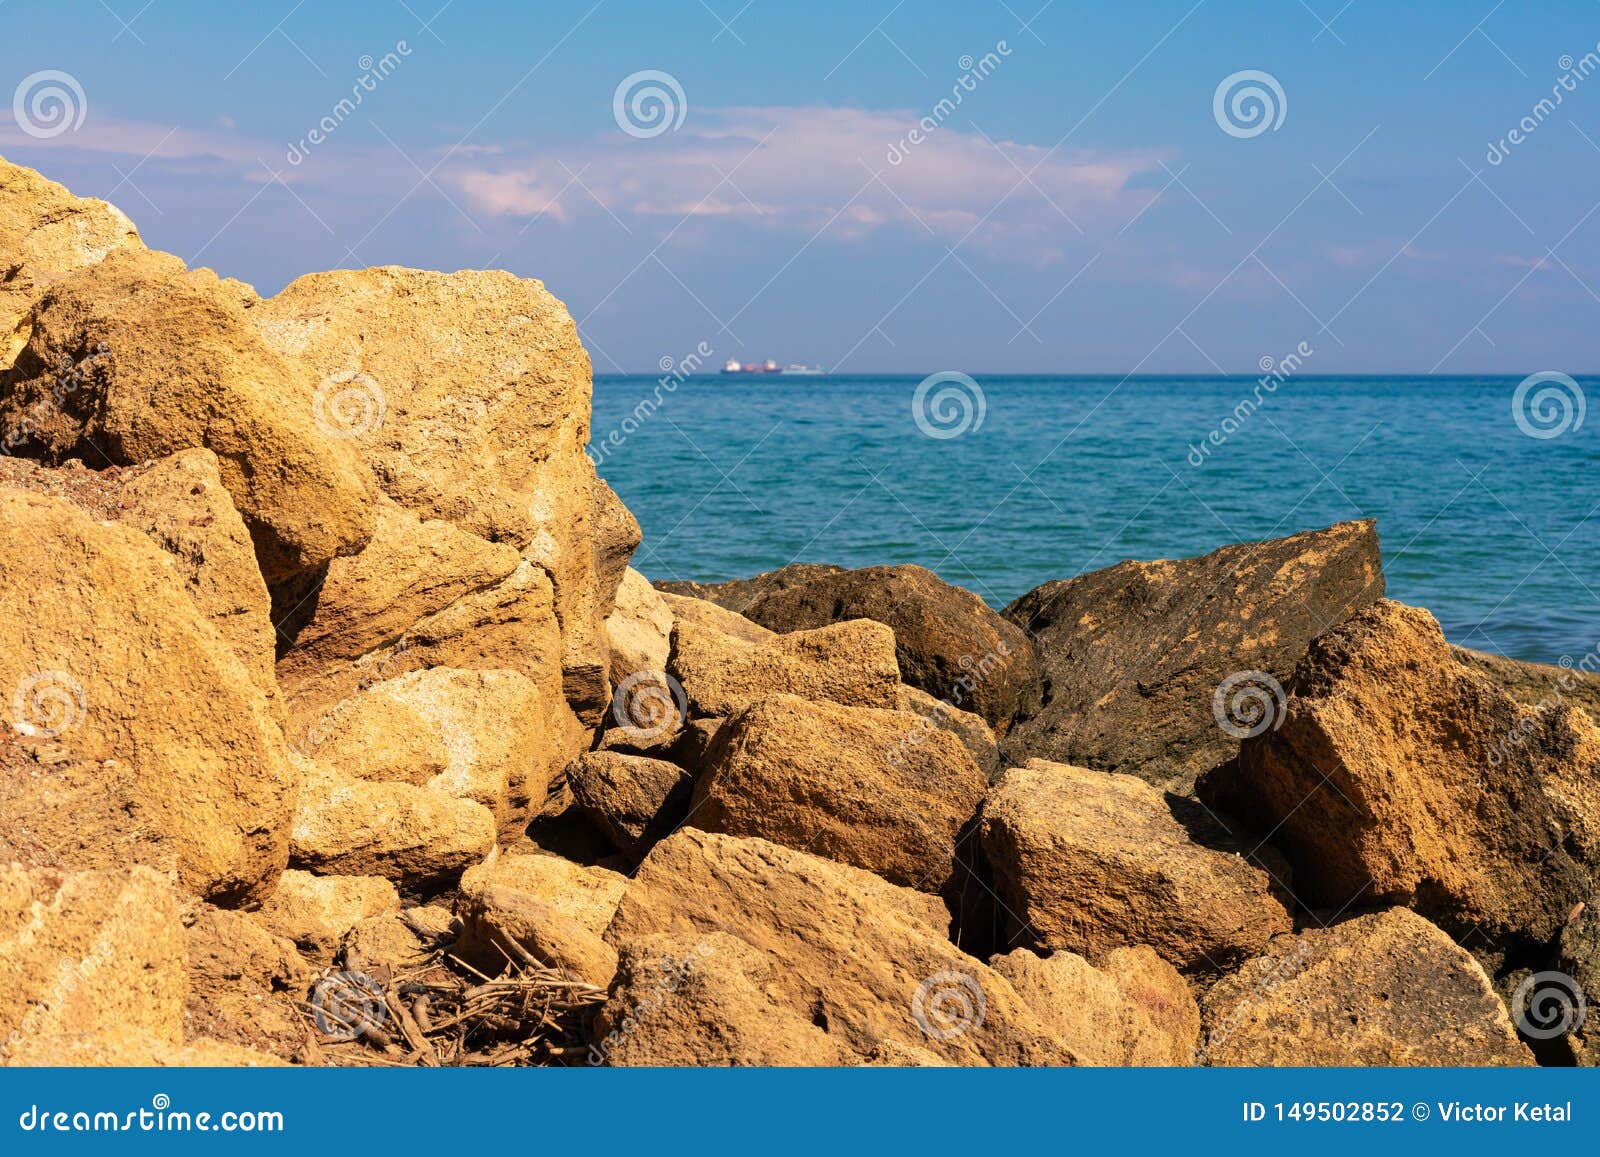 View Of The Black Sea On A Clear Sunny Day On The Shore Stones And